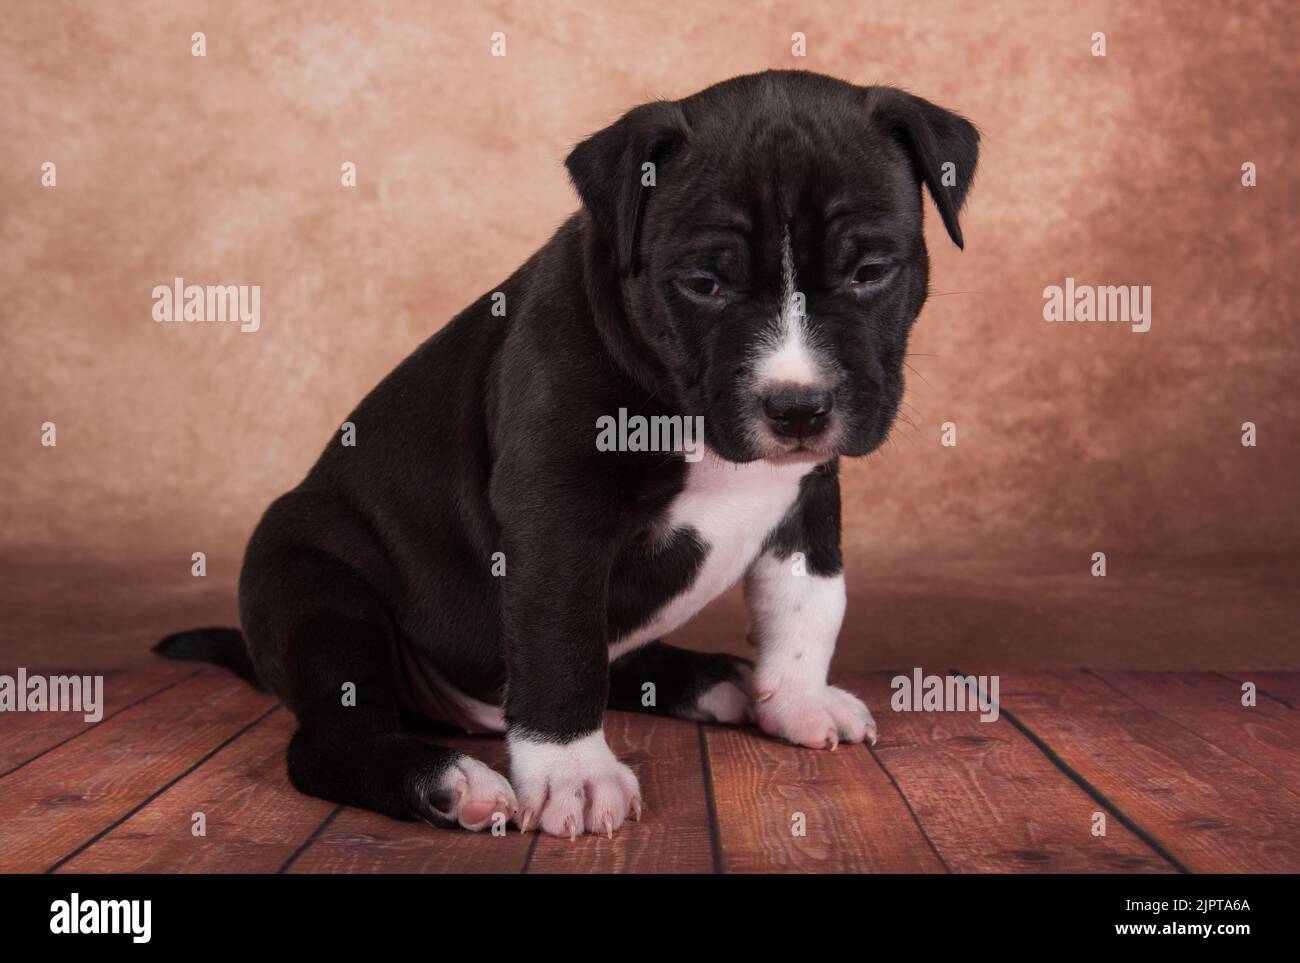 Black and white American Staffordshire Terrier dog or AmStaff puppy on brown background Stock Photo